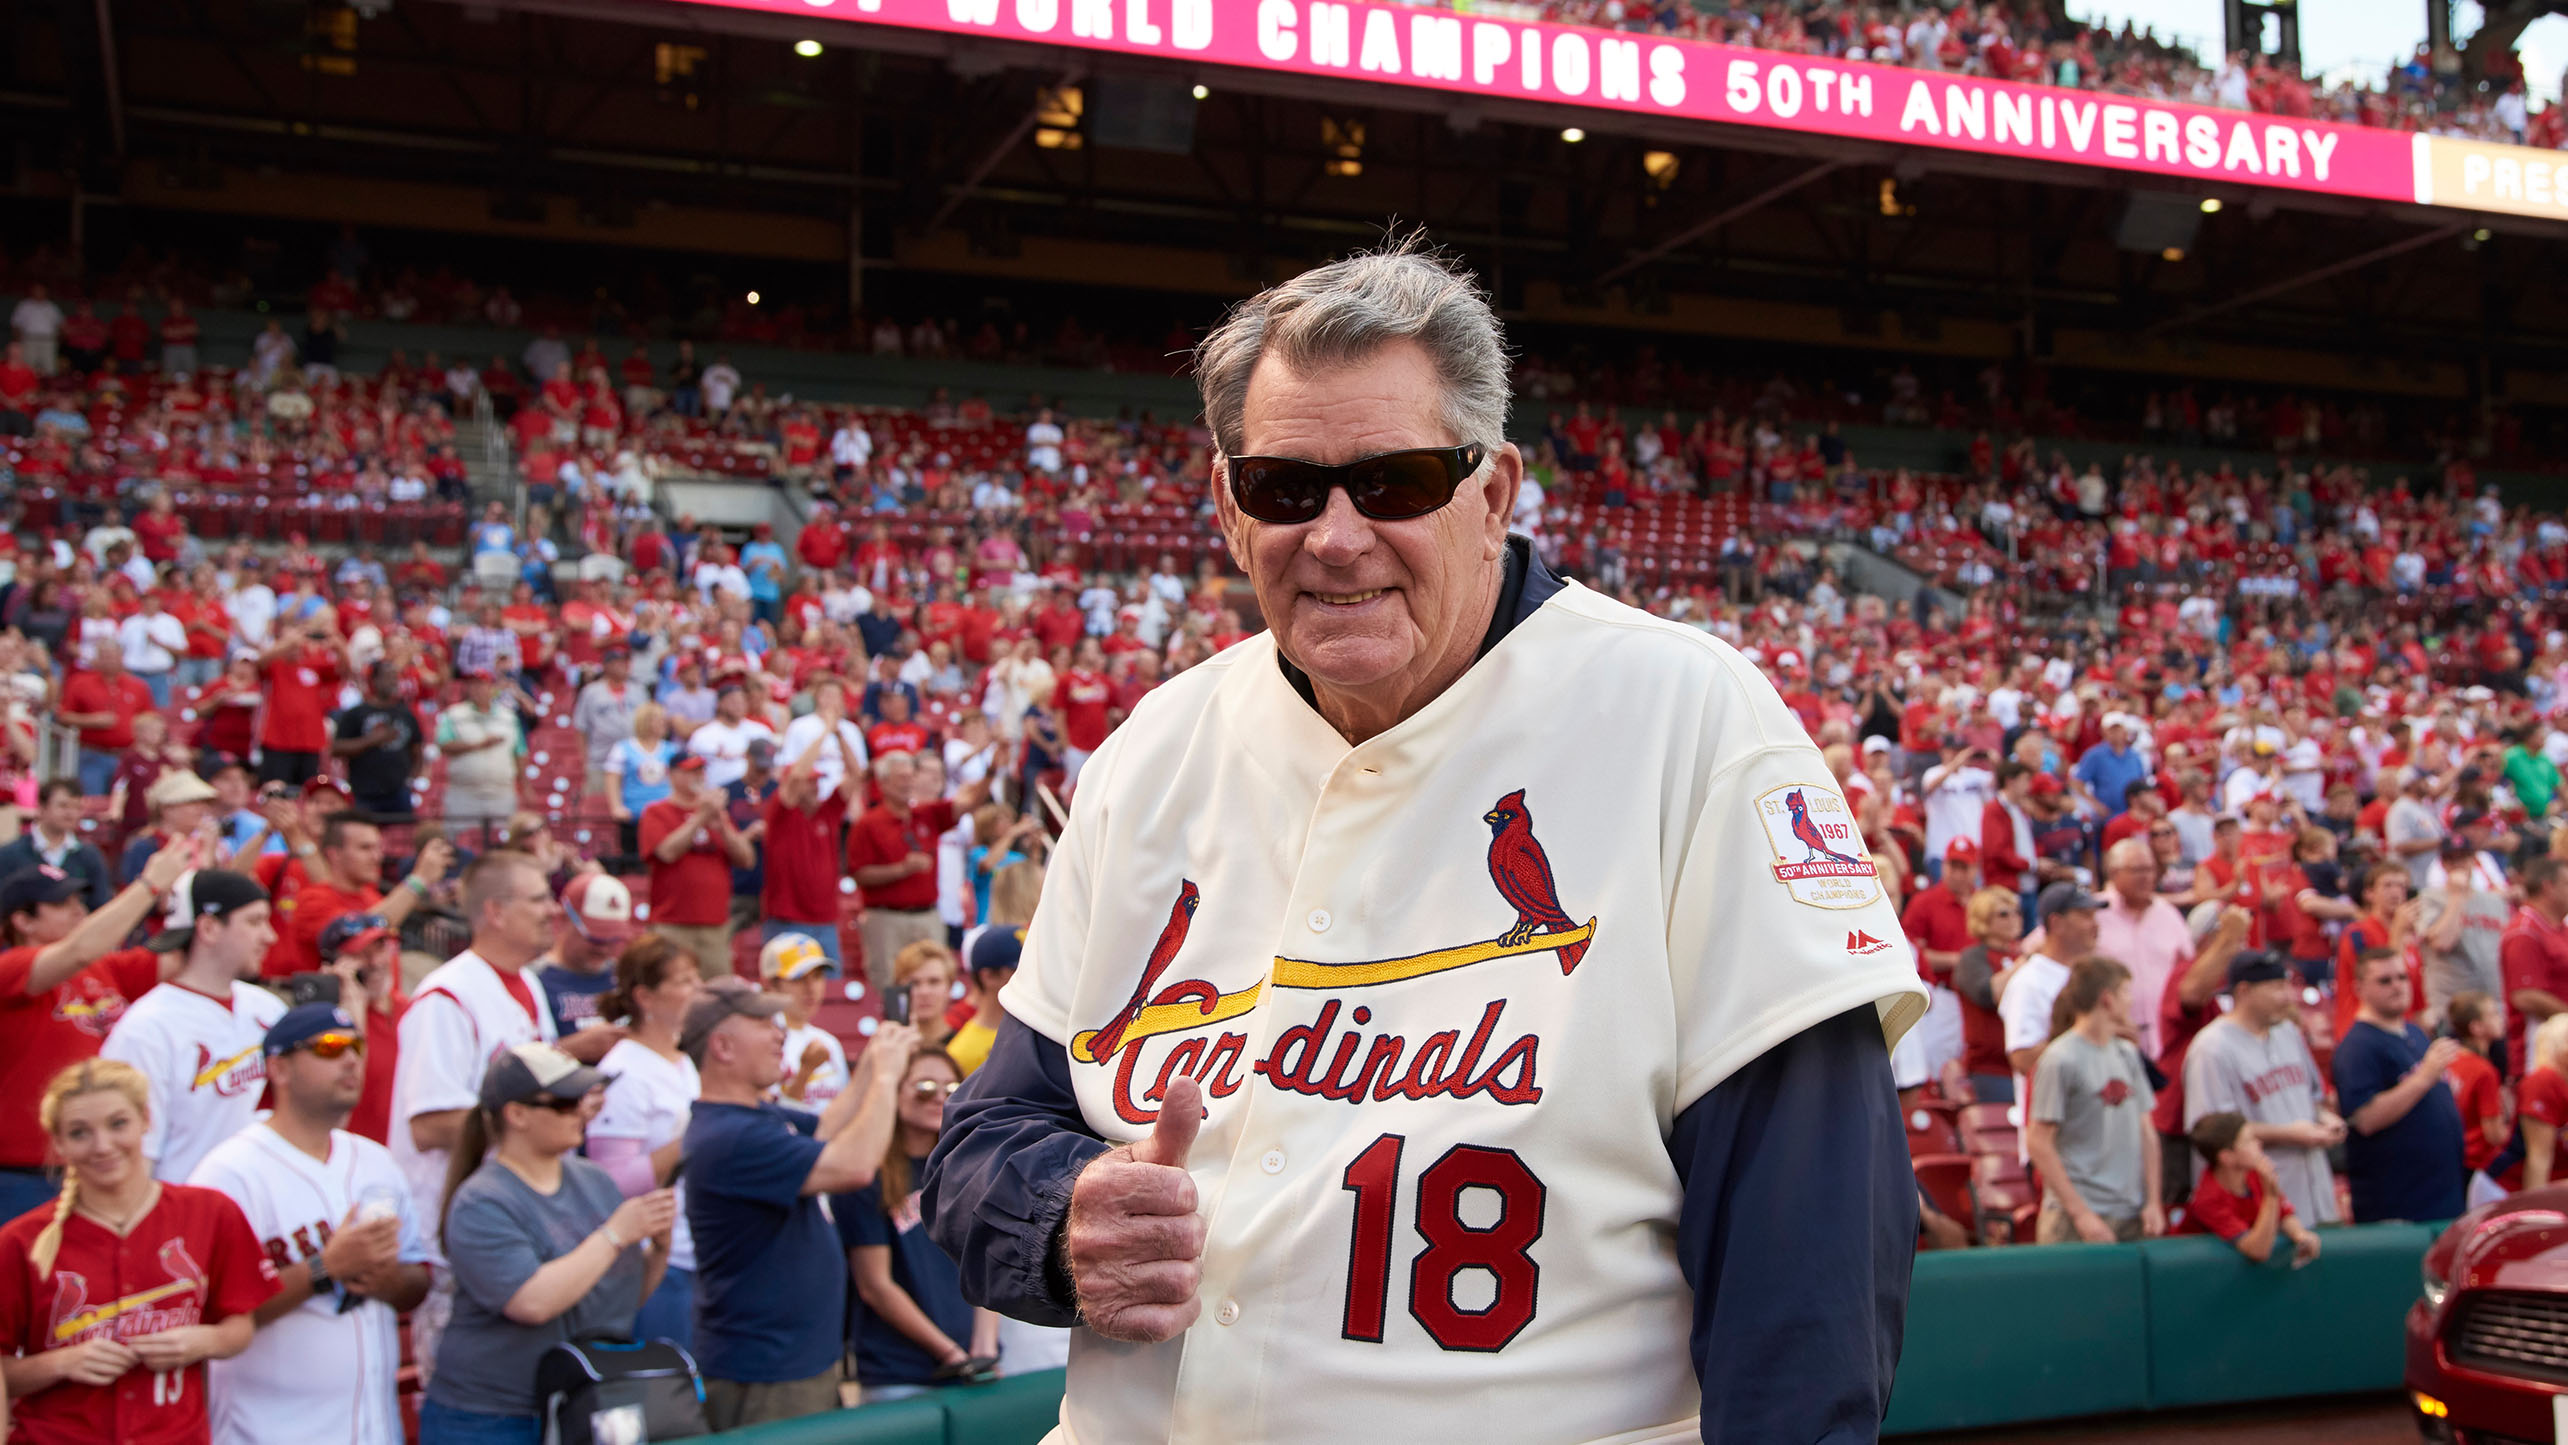 Mike Shannon, a St. Louis Cardinals institution as player and